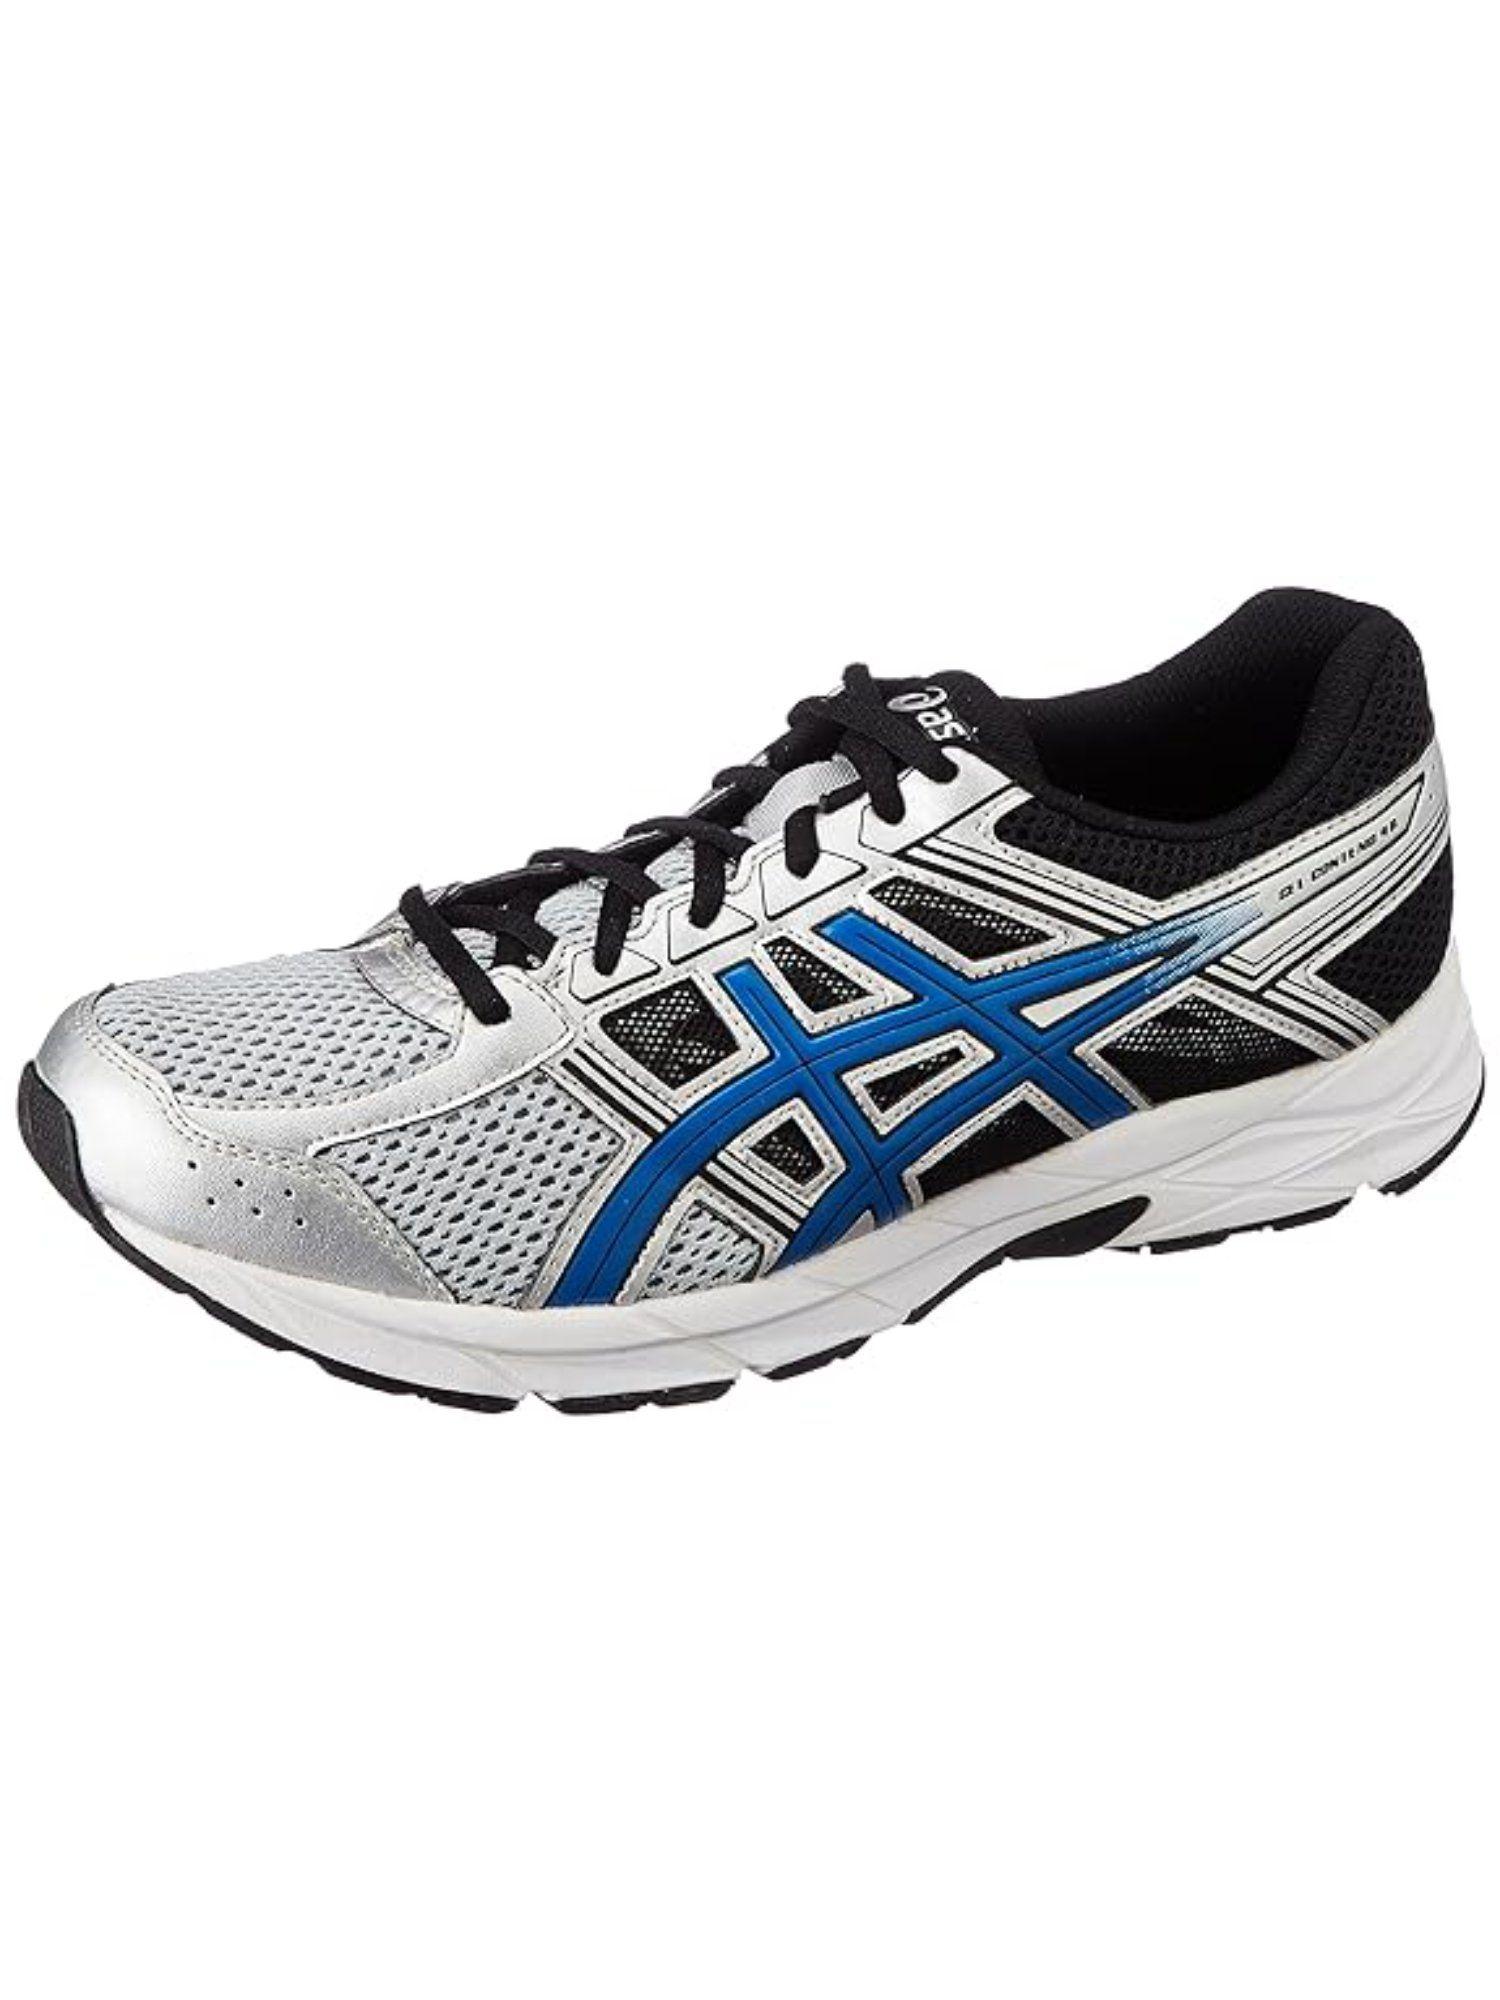 gel-contend 4b silver mens running shoes